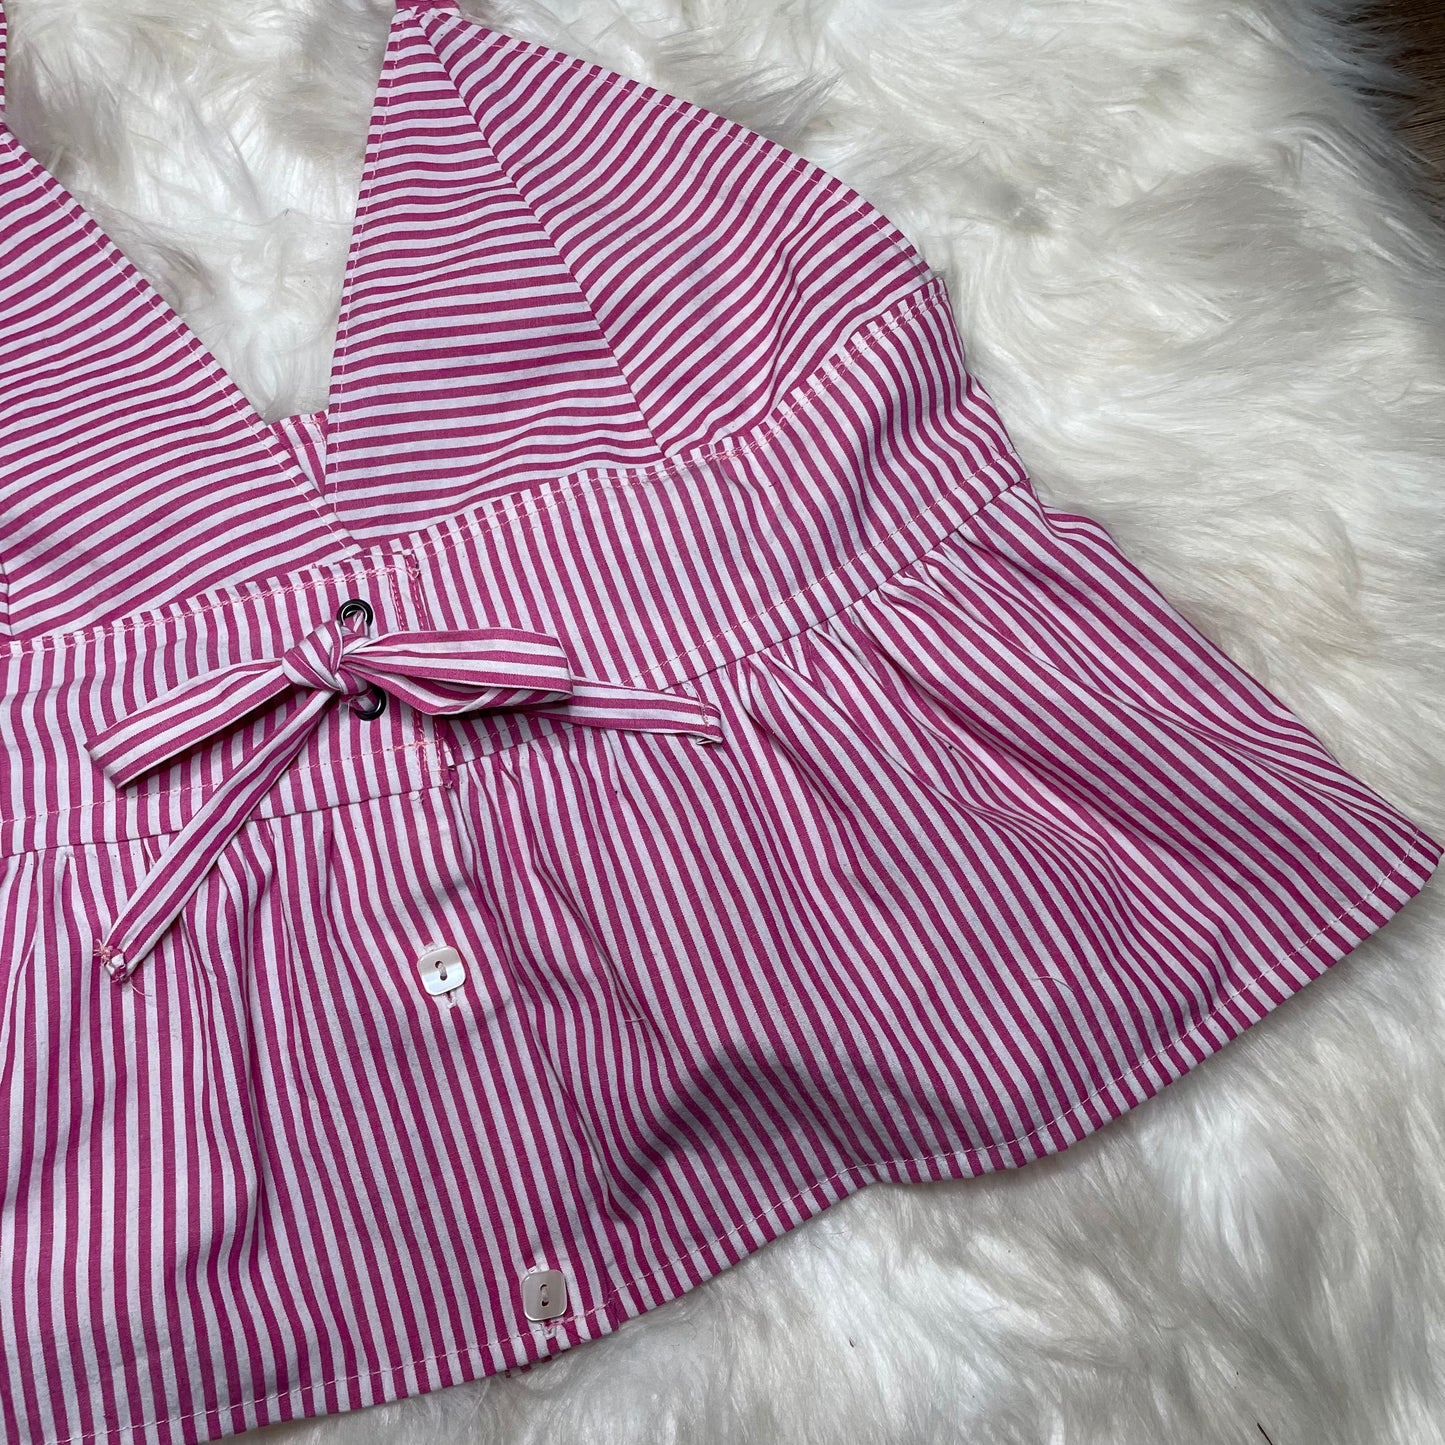 Upcycled Pinstripe Top